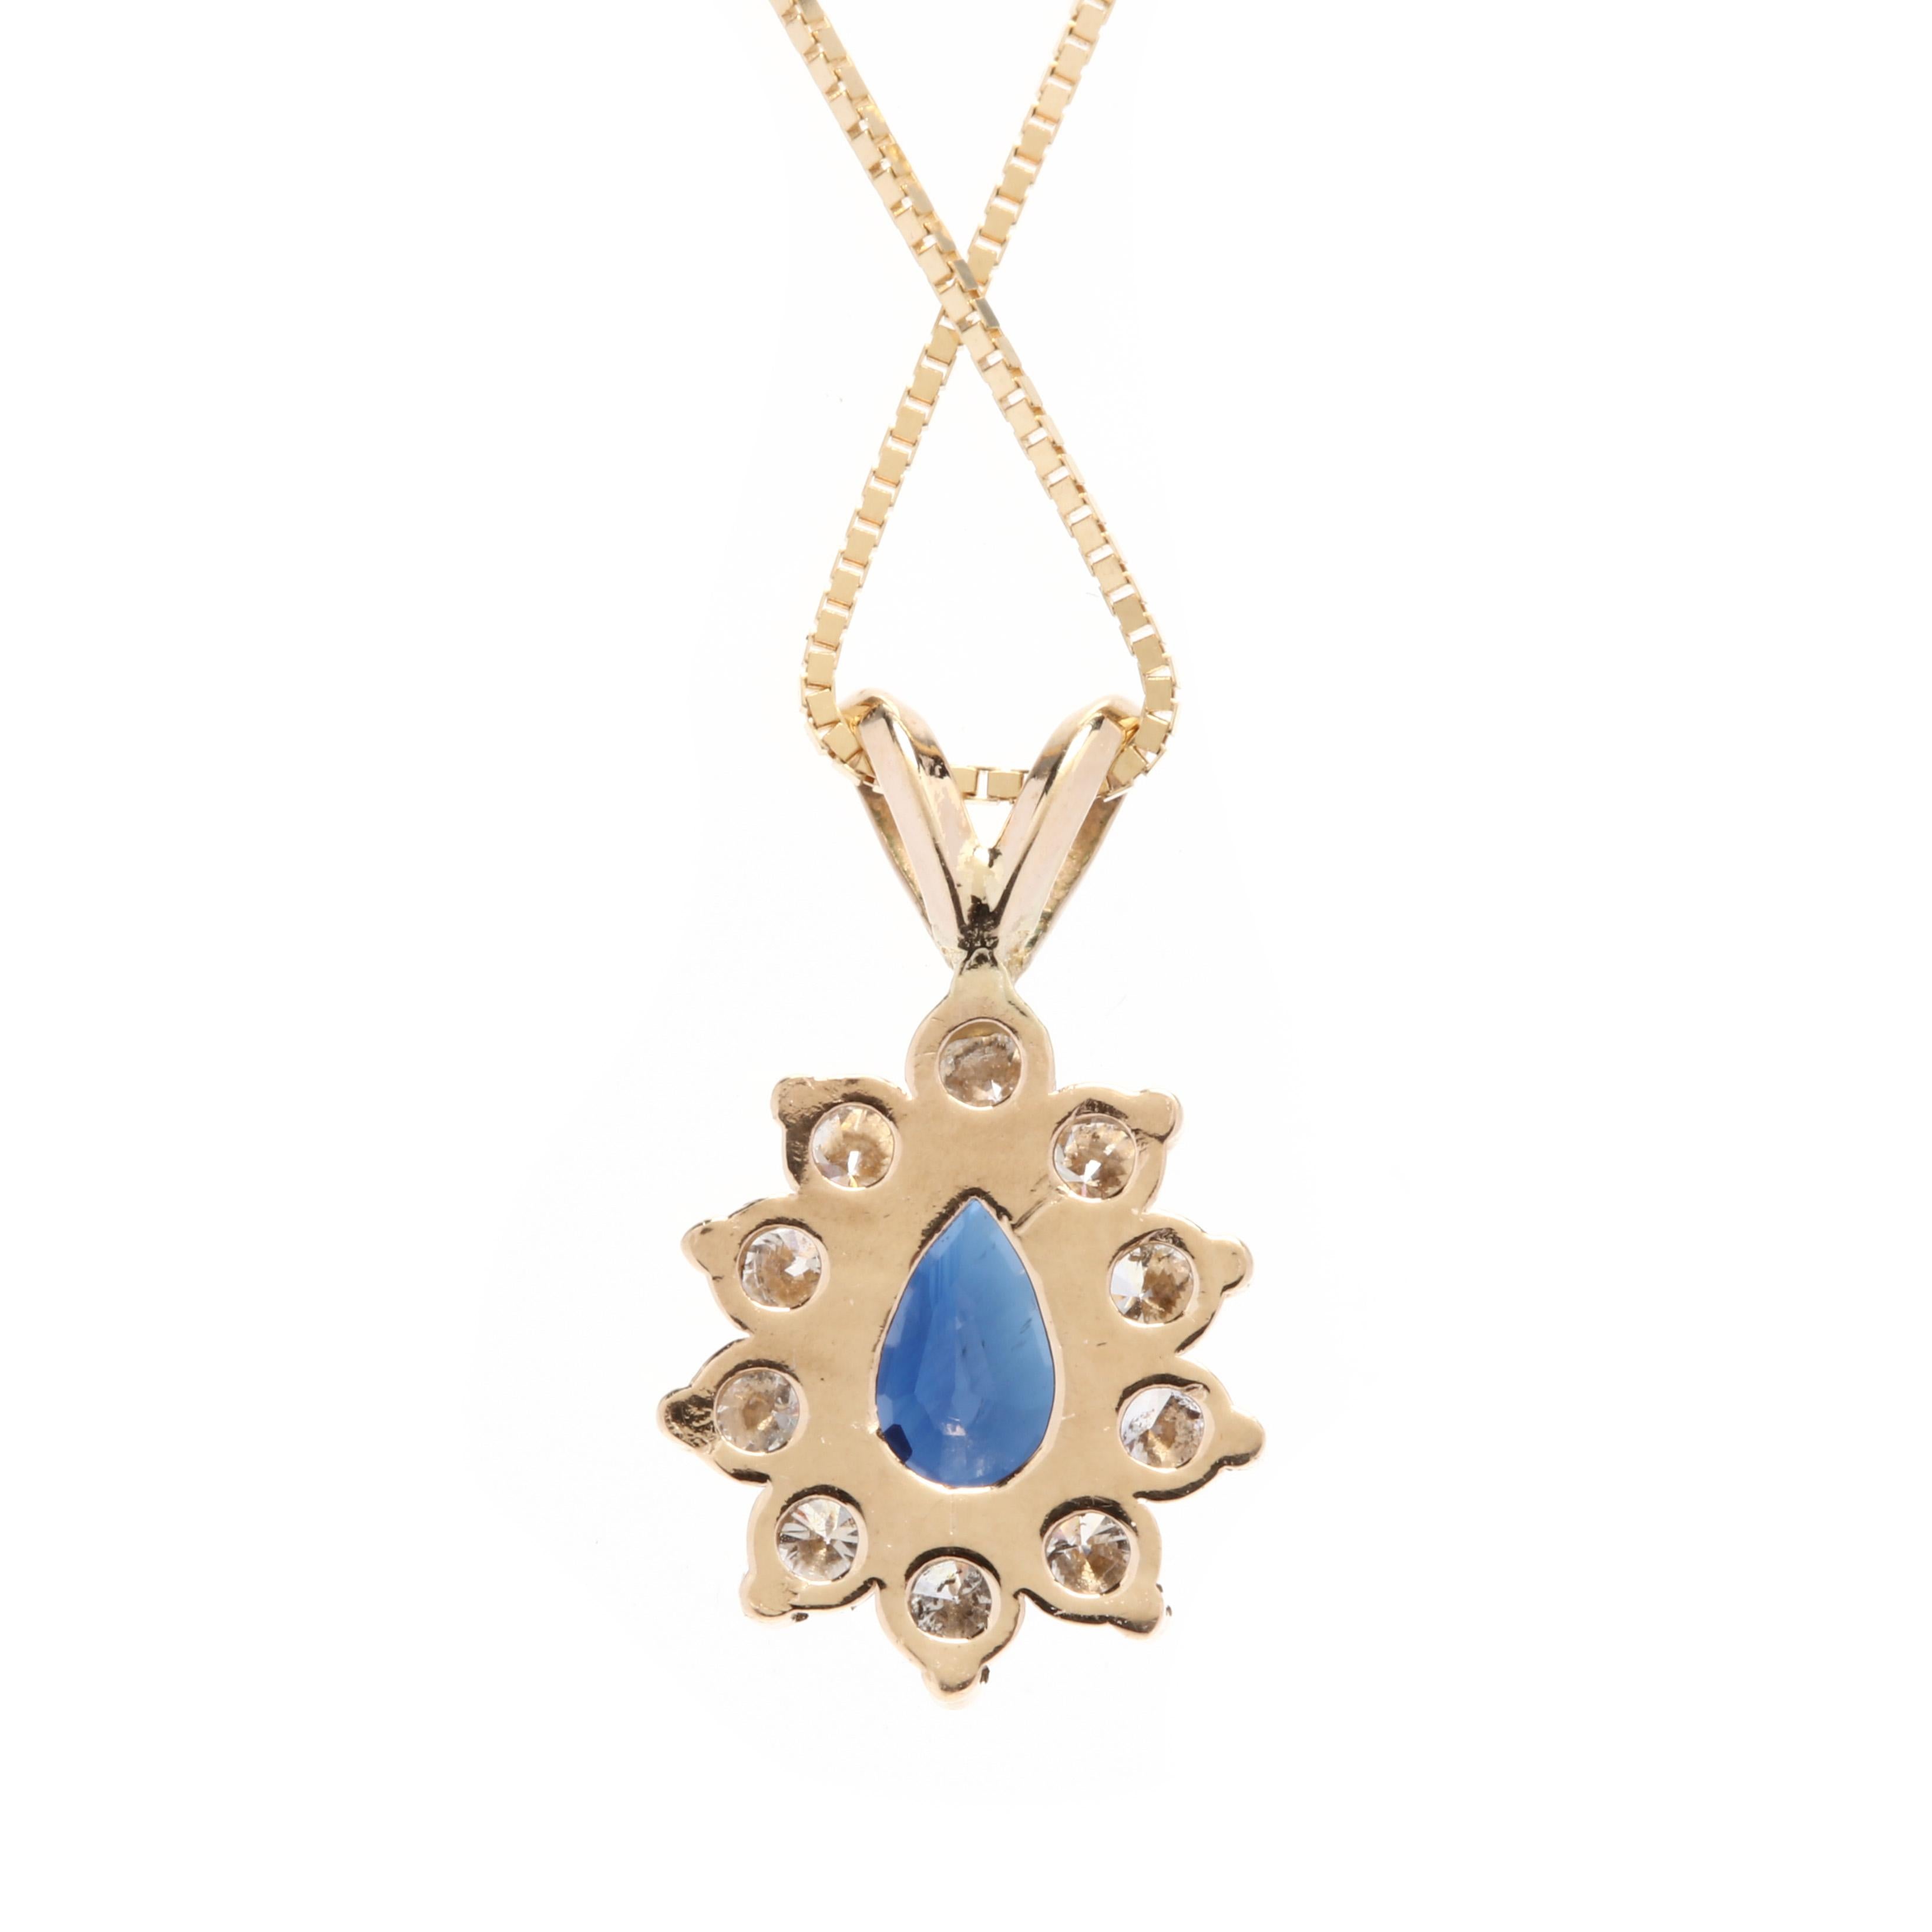 An 18 karat and 14 karat yellow gold, sapphire and diamond teardrop pendant necklace. This necklace features a pear cut blue sapphire weighing approximately .60 carat surrounded by a halo of full cut round diamonds weighing approximately .30 total